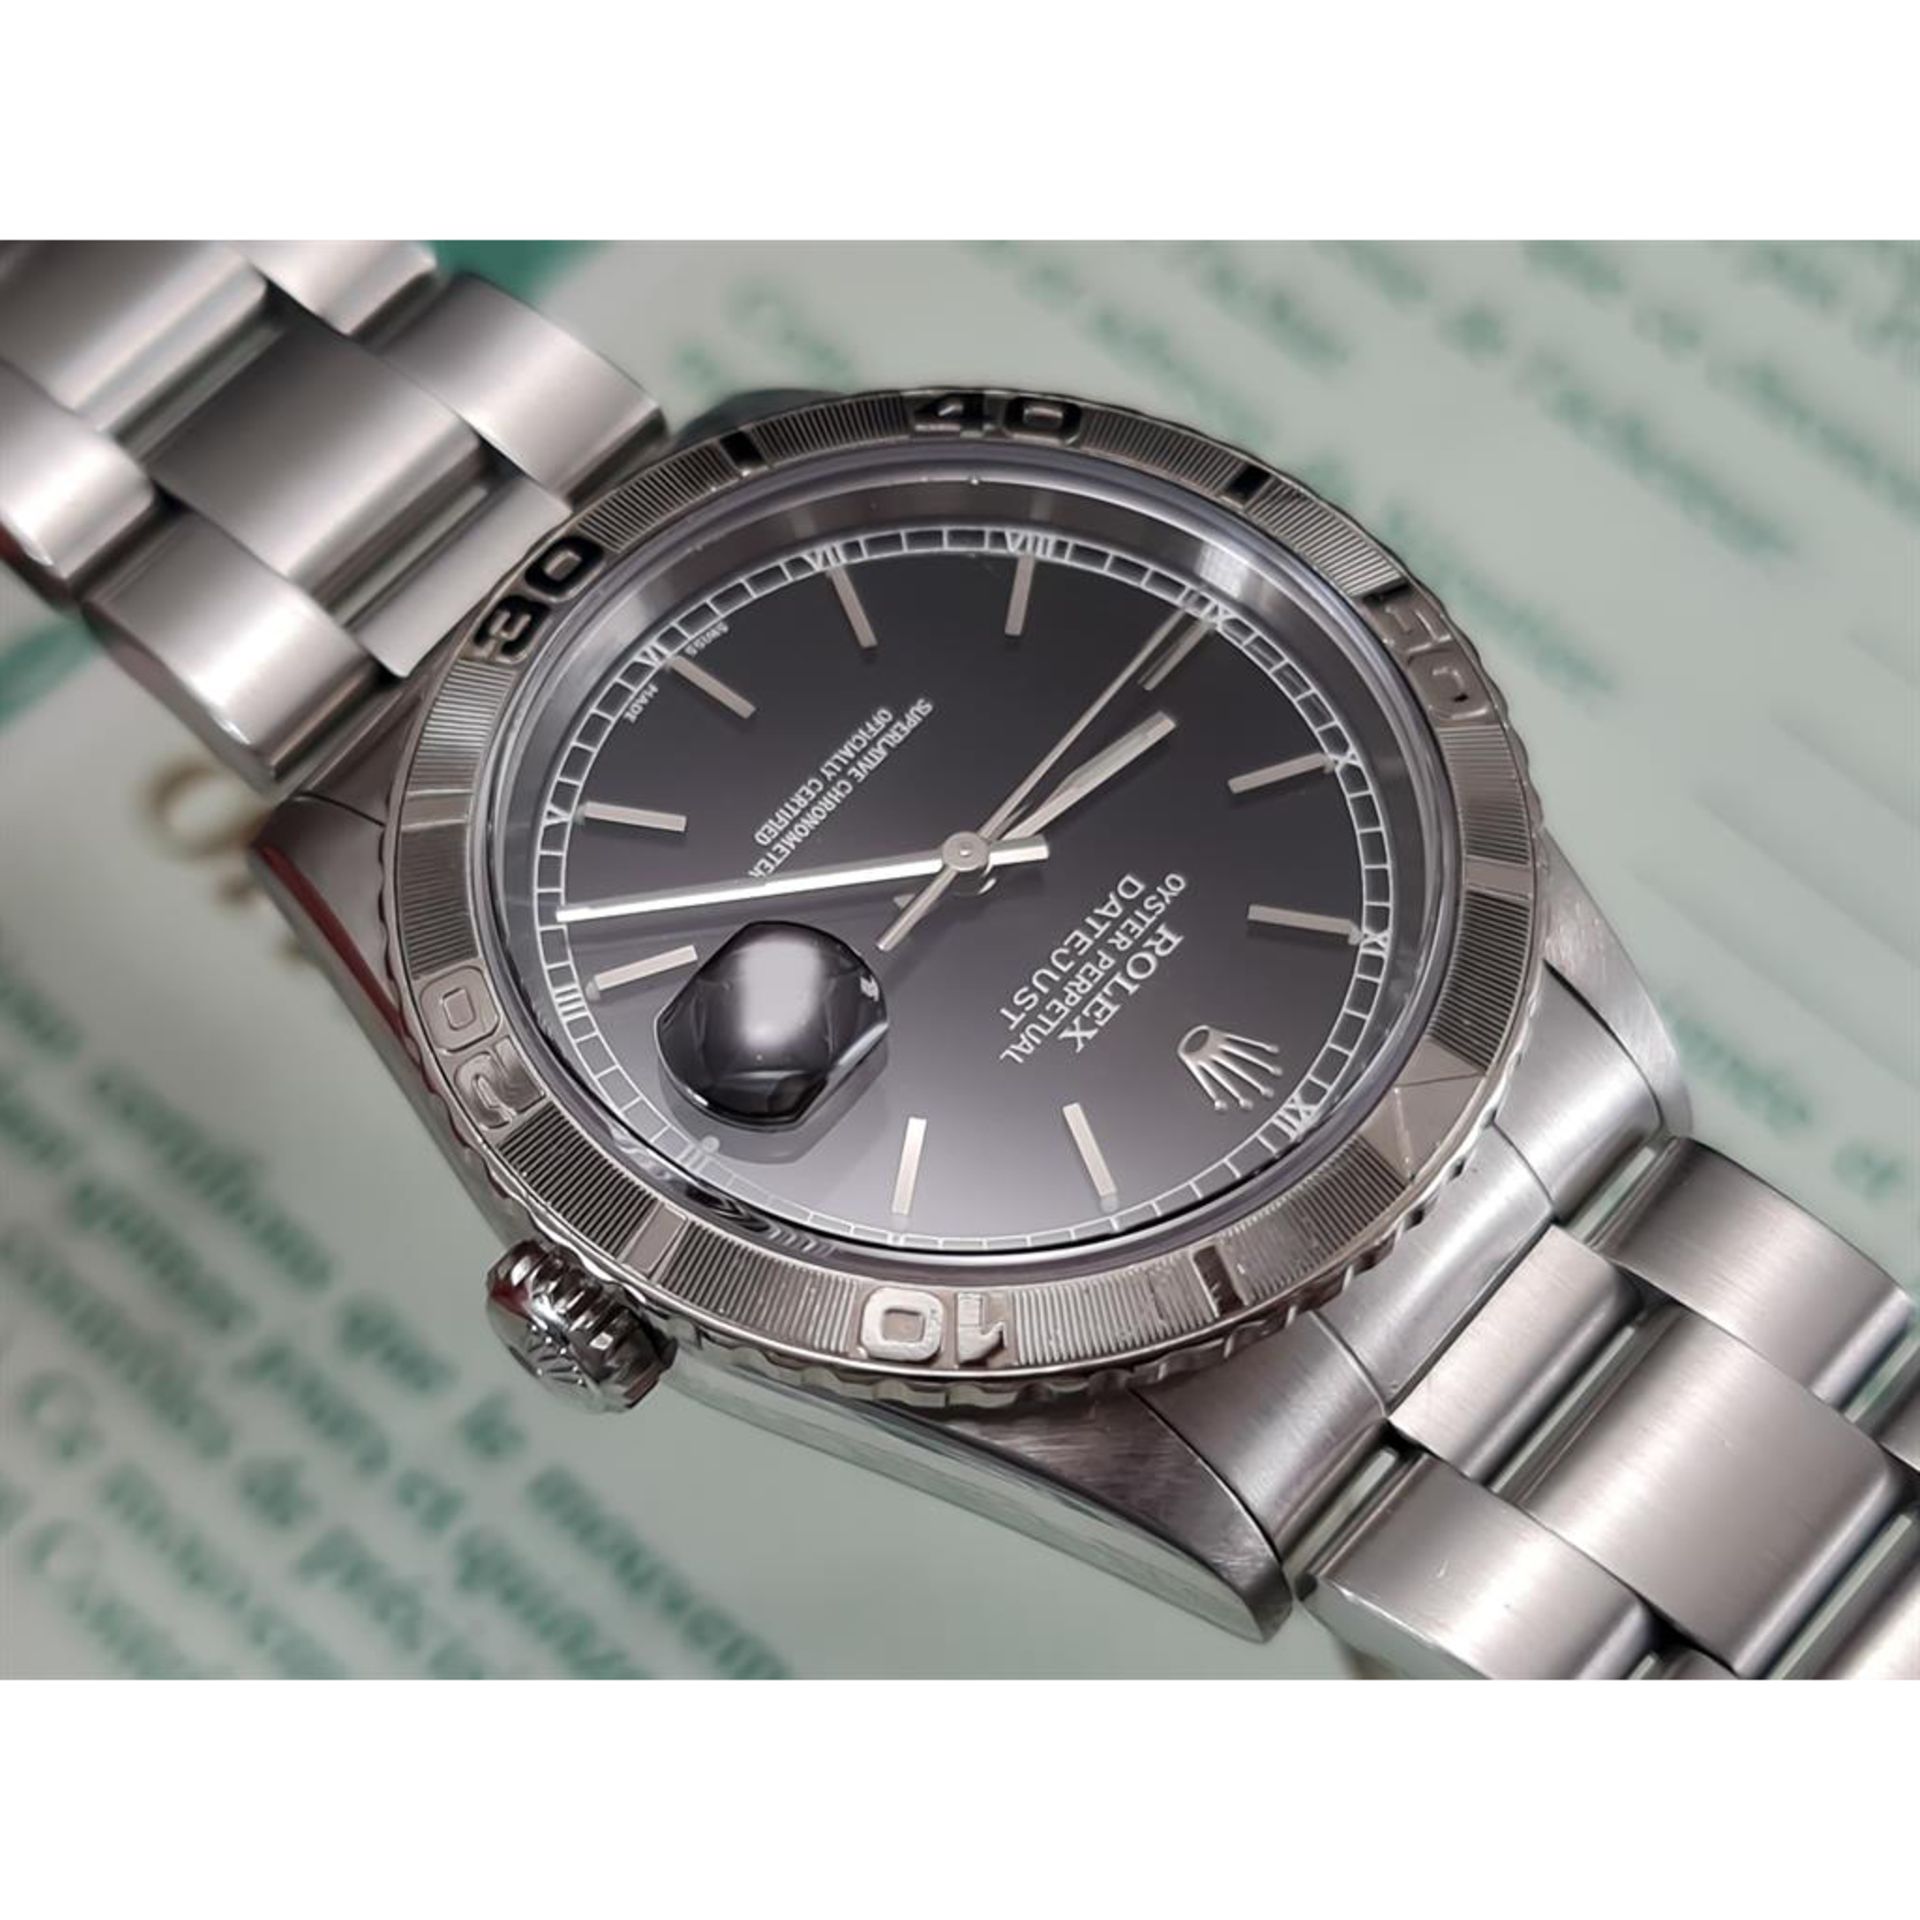 1999 Rolex Datejust Turn-O-Graph 16264 Steel White Gold - Black Dial - Oyster - Image 6 of 11